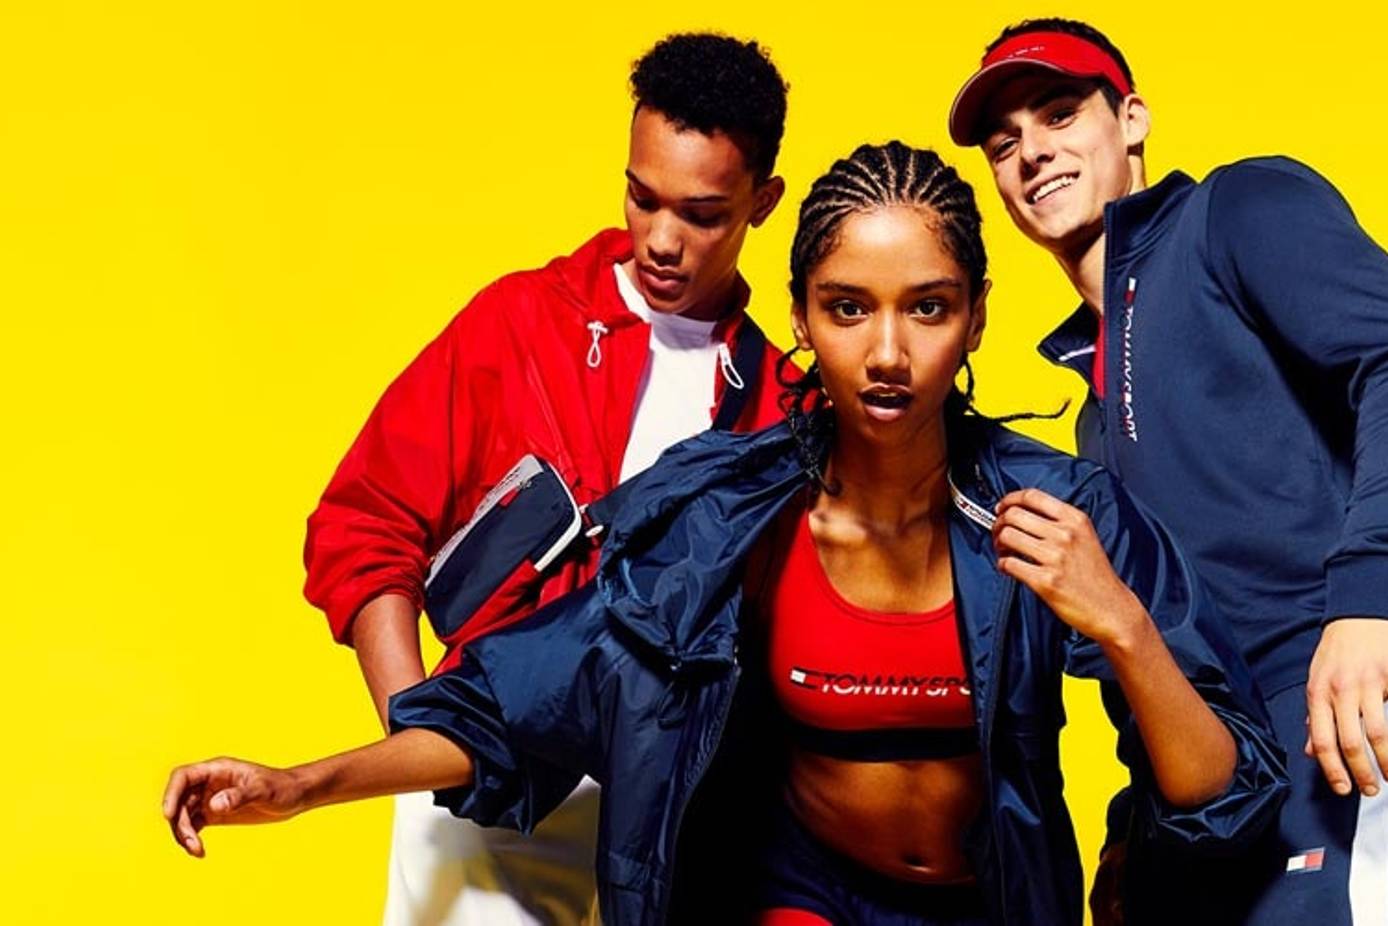 In pictures: Tommy Hilfiger launches Tommy sport, its first